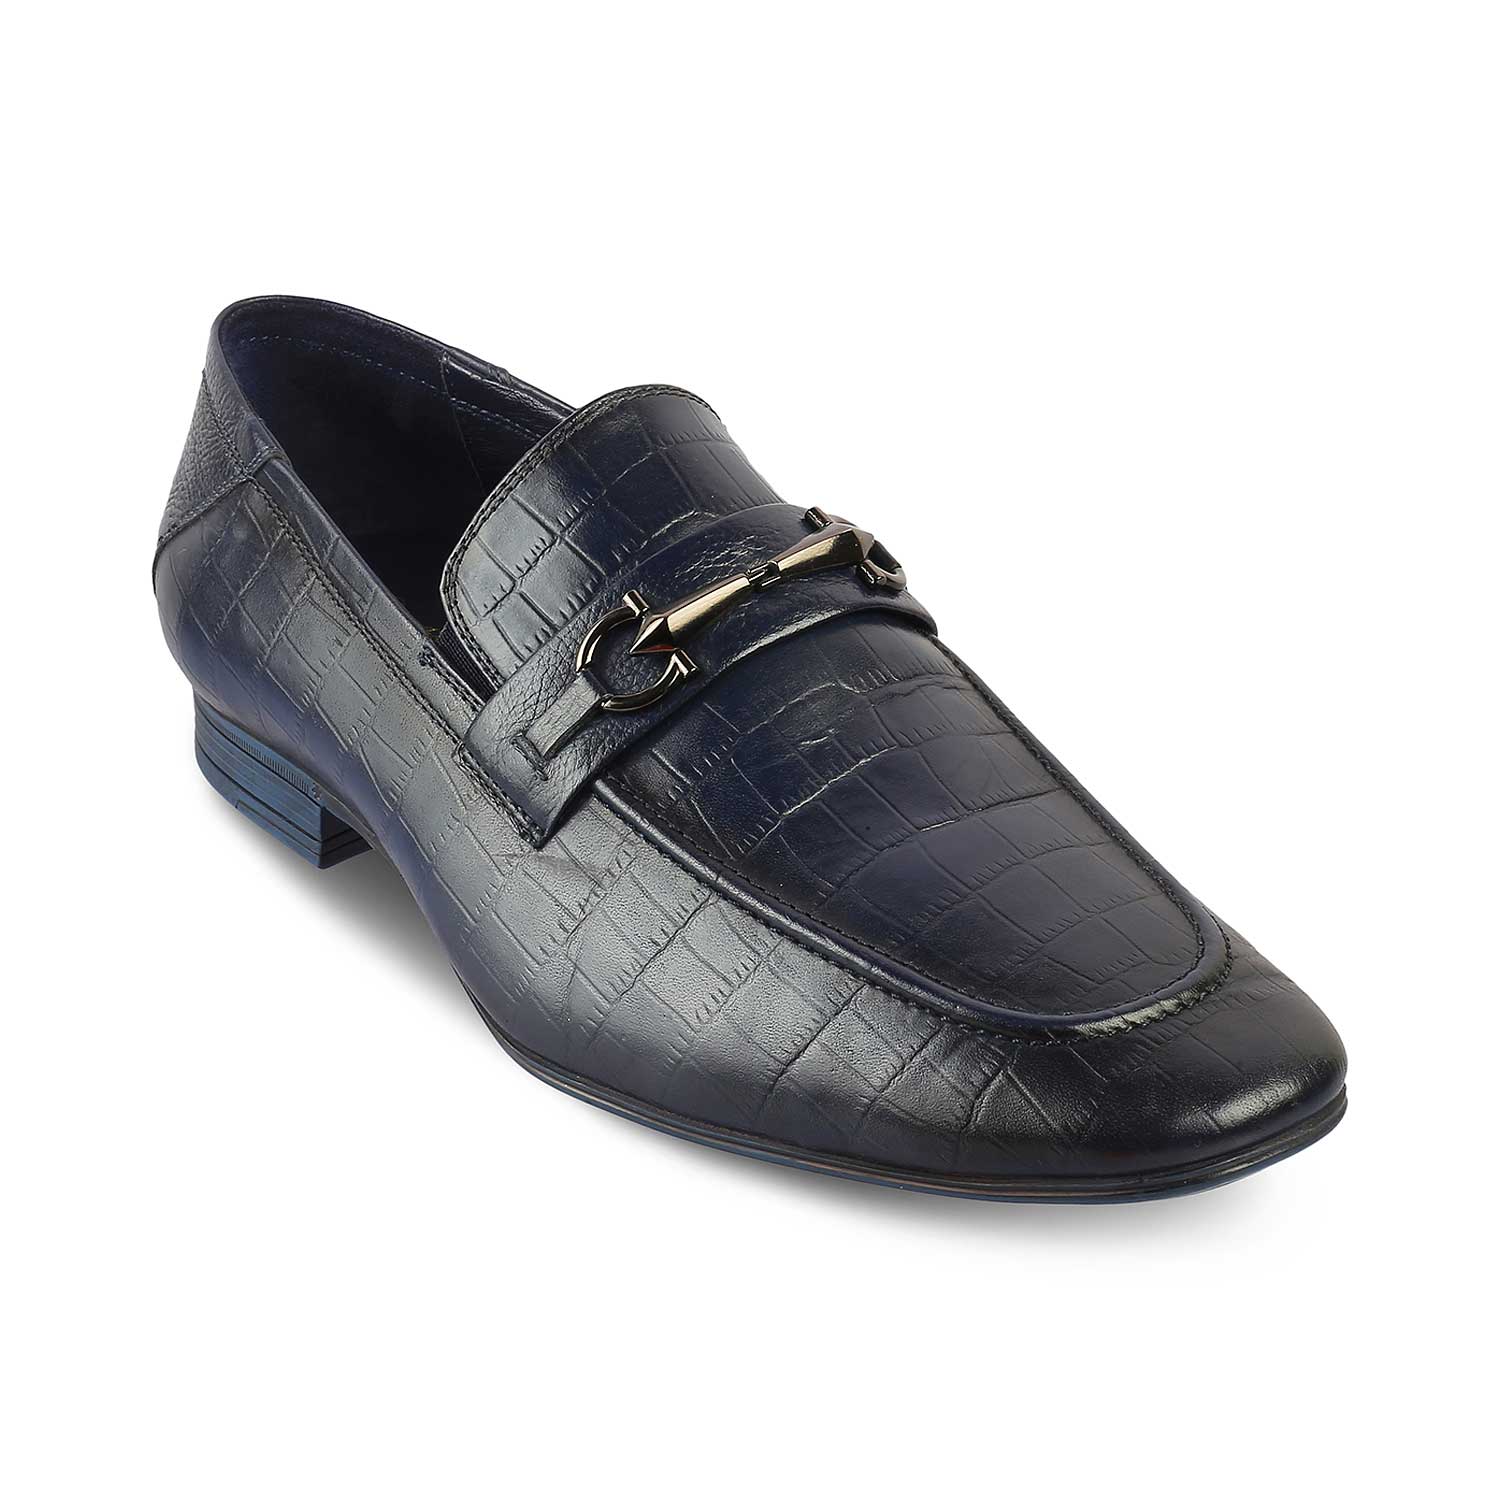 The Reptile Blue Mens Leather Loafers Online at Tresmode.com